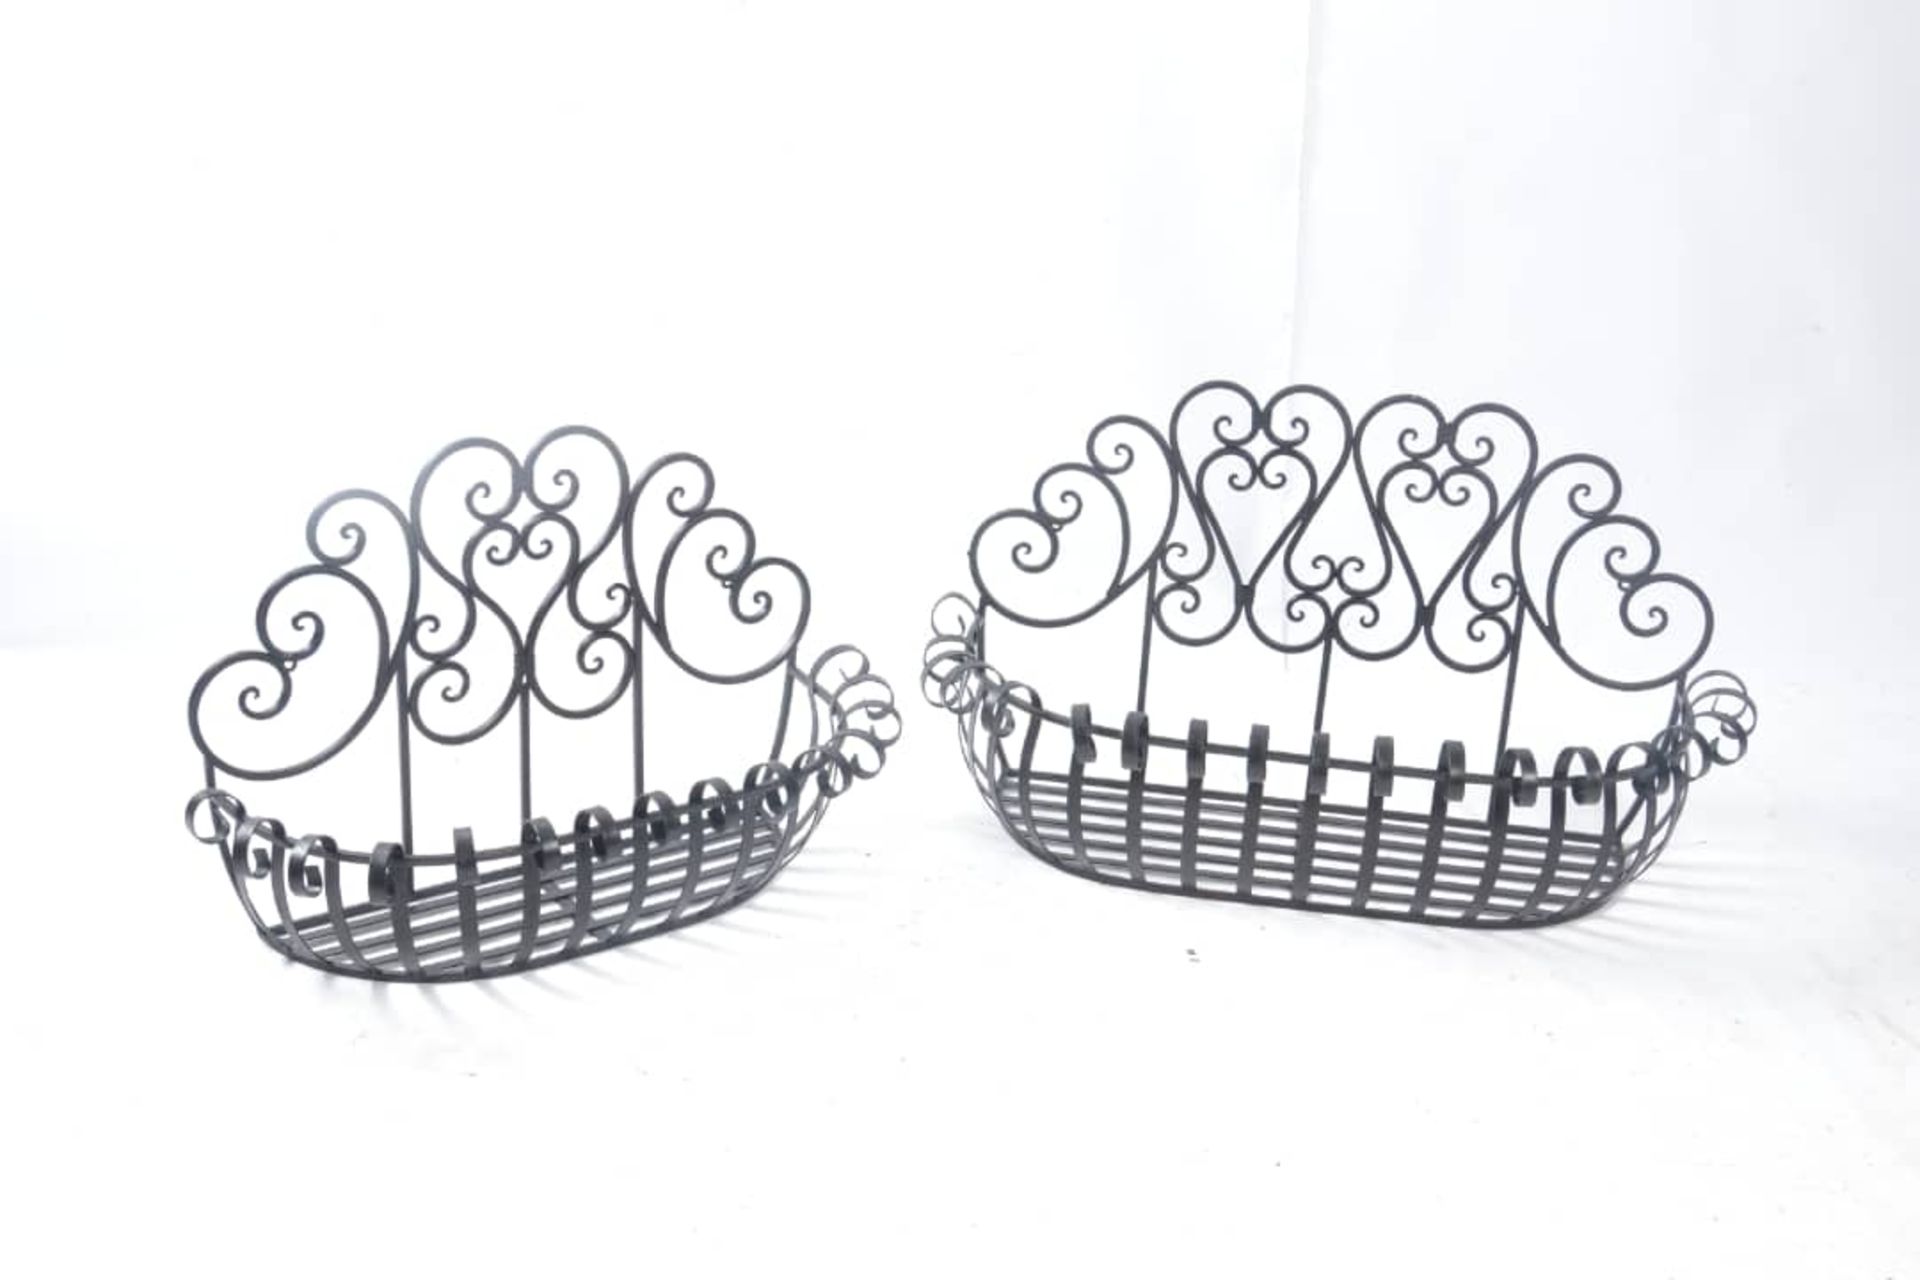 DECORATIVE TWO PIECE IRON ORNATE WALL HANGING PLANTERS